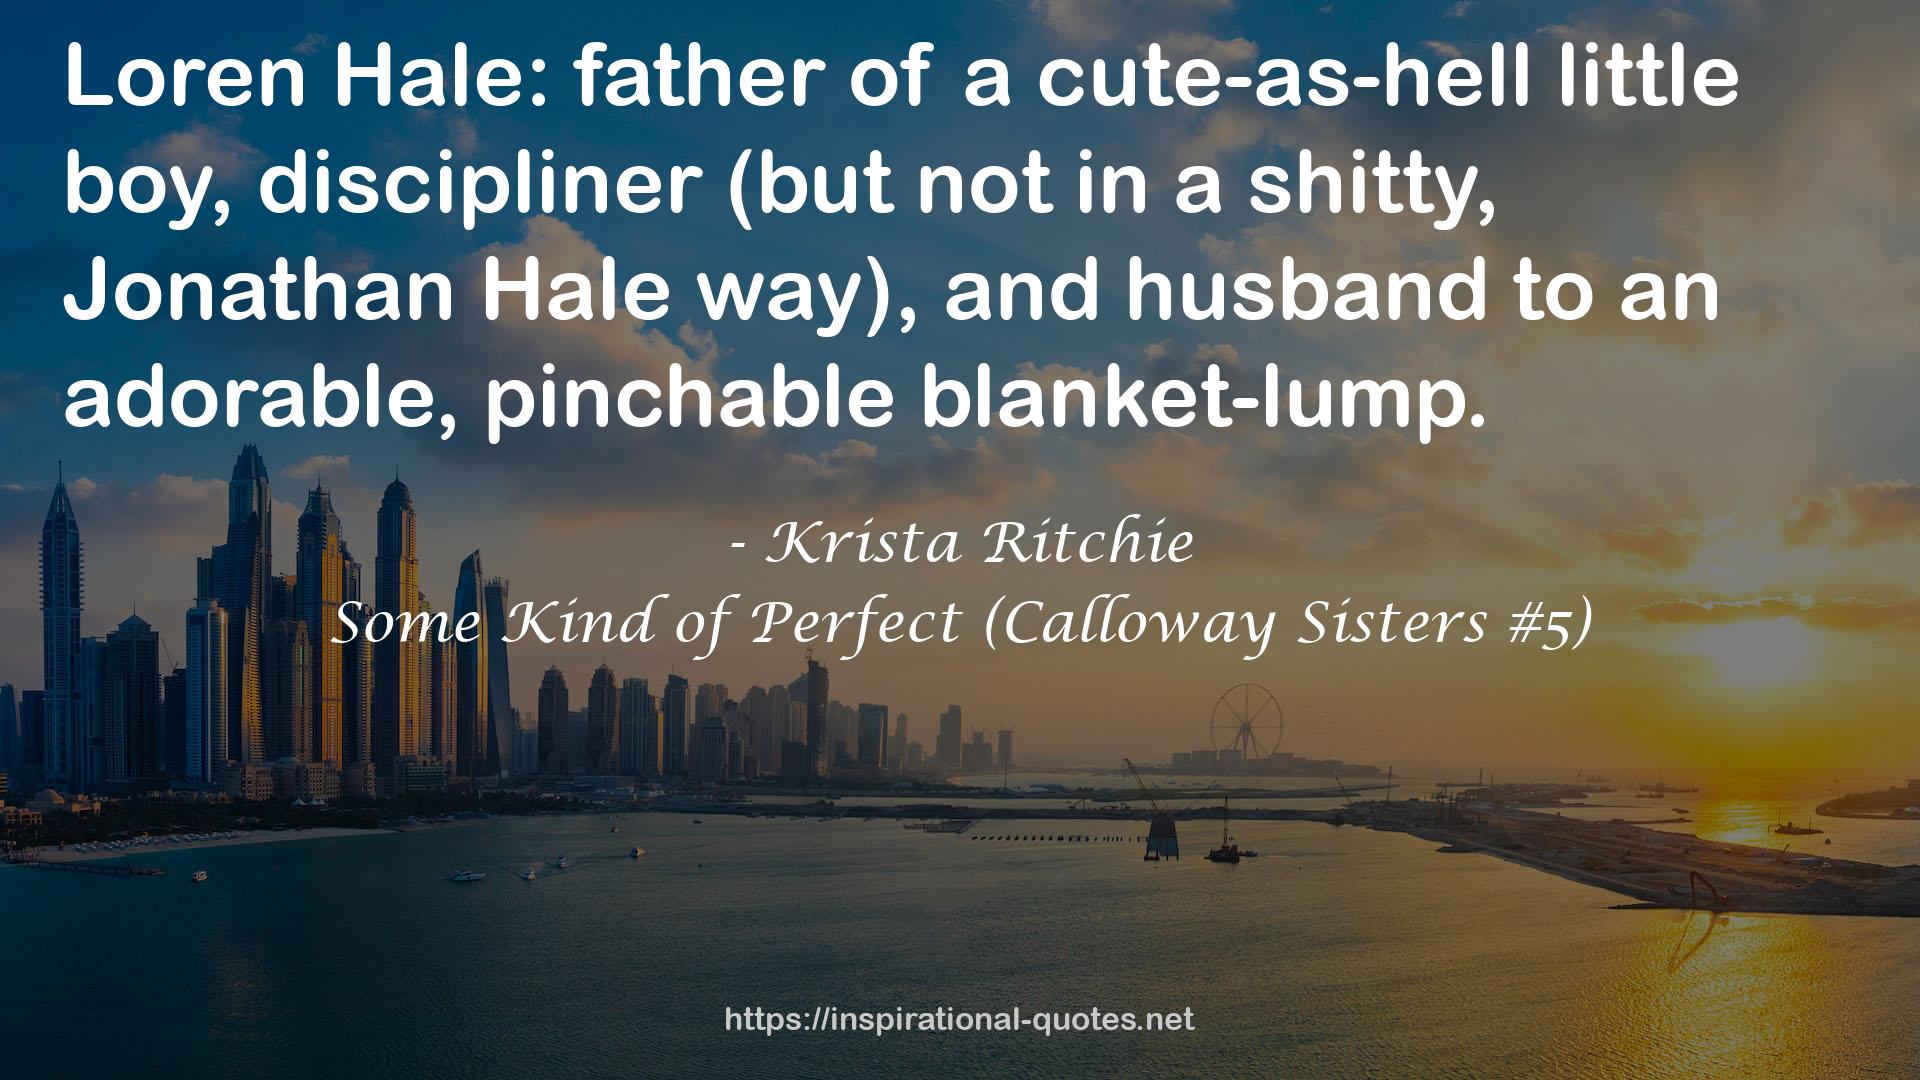 Some Kind of Perfect (Calloway Sisters #5) QUOTES